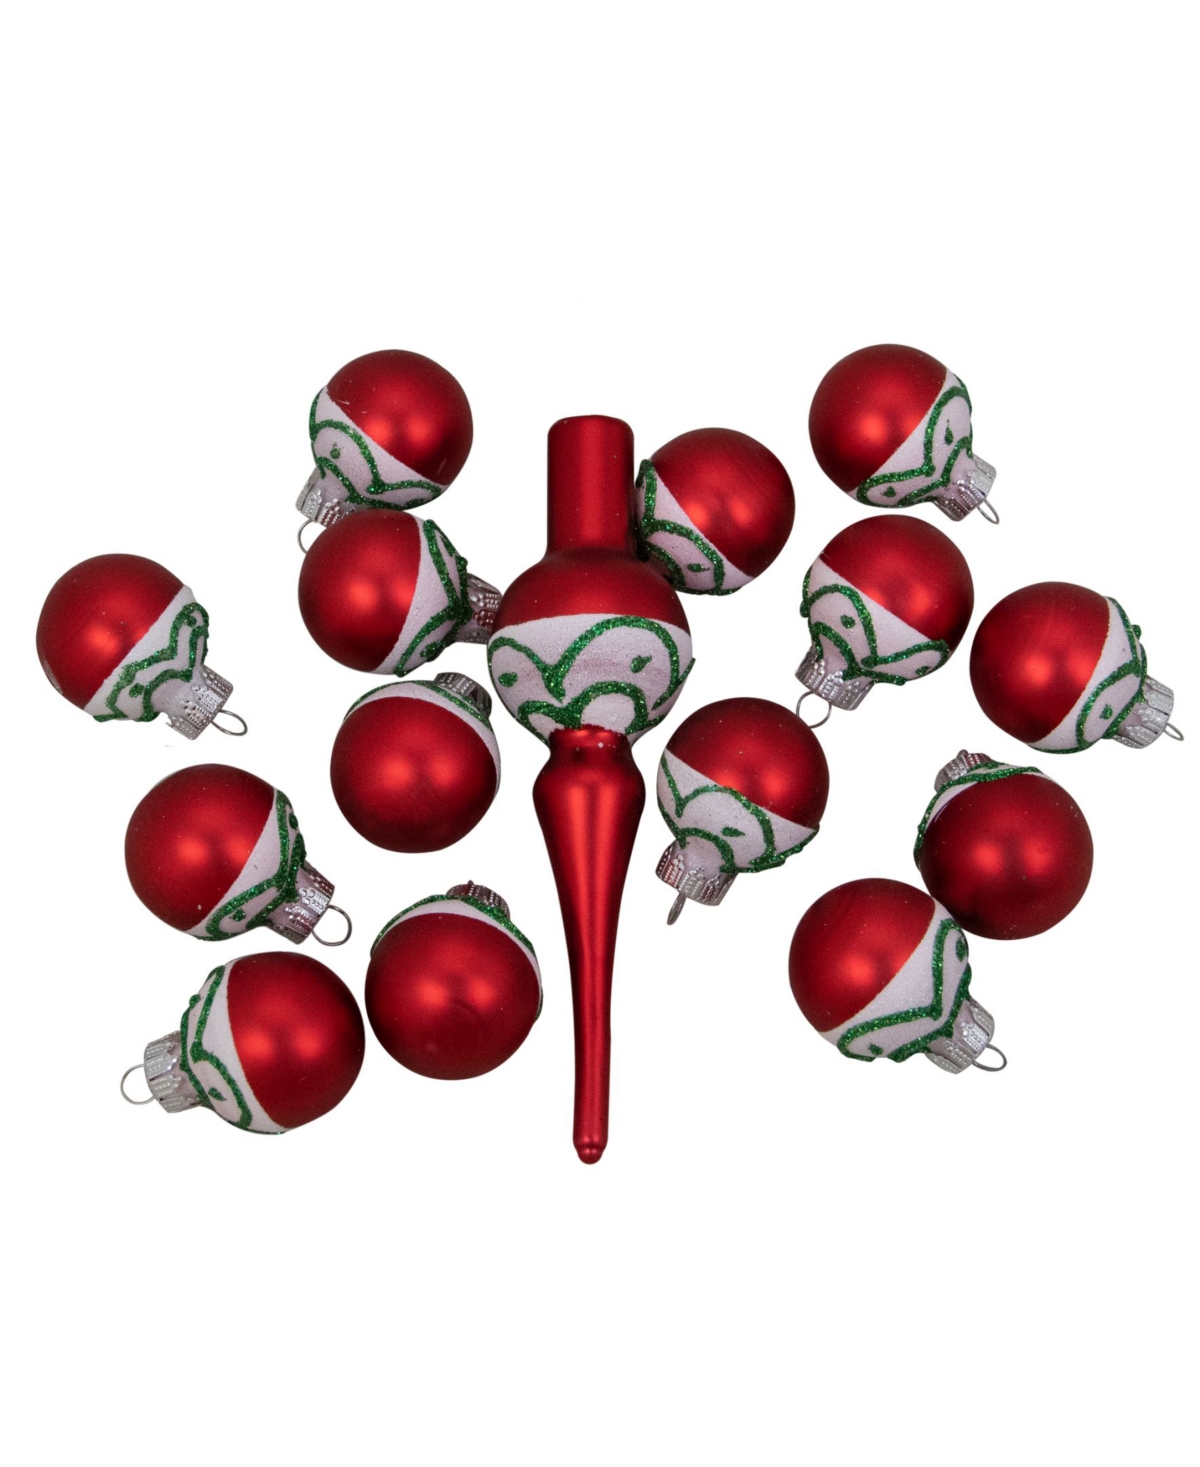 15 Count Frosted Tree Topper with Christmas Ball Ornaments - Red